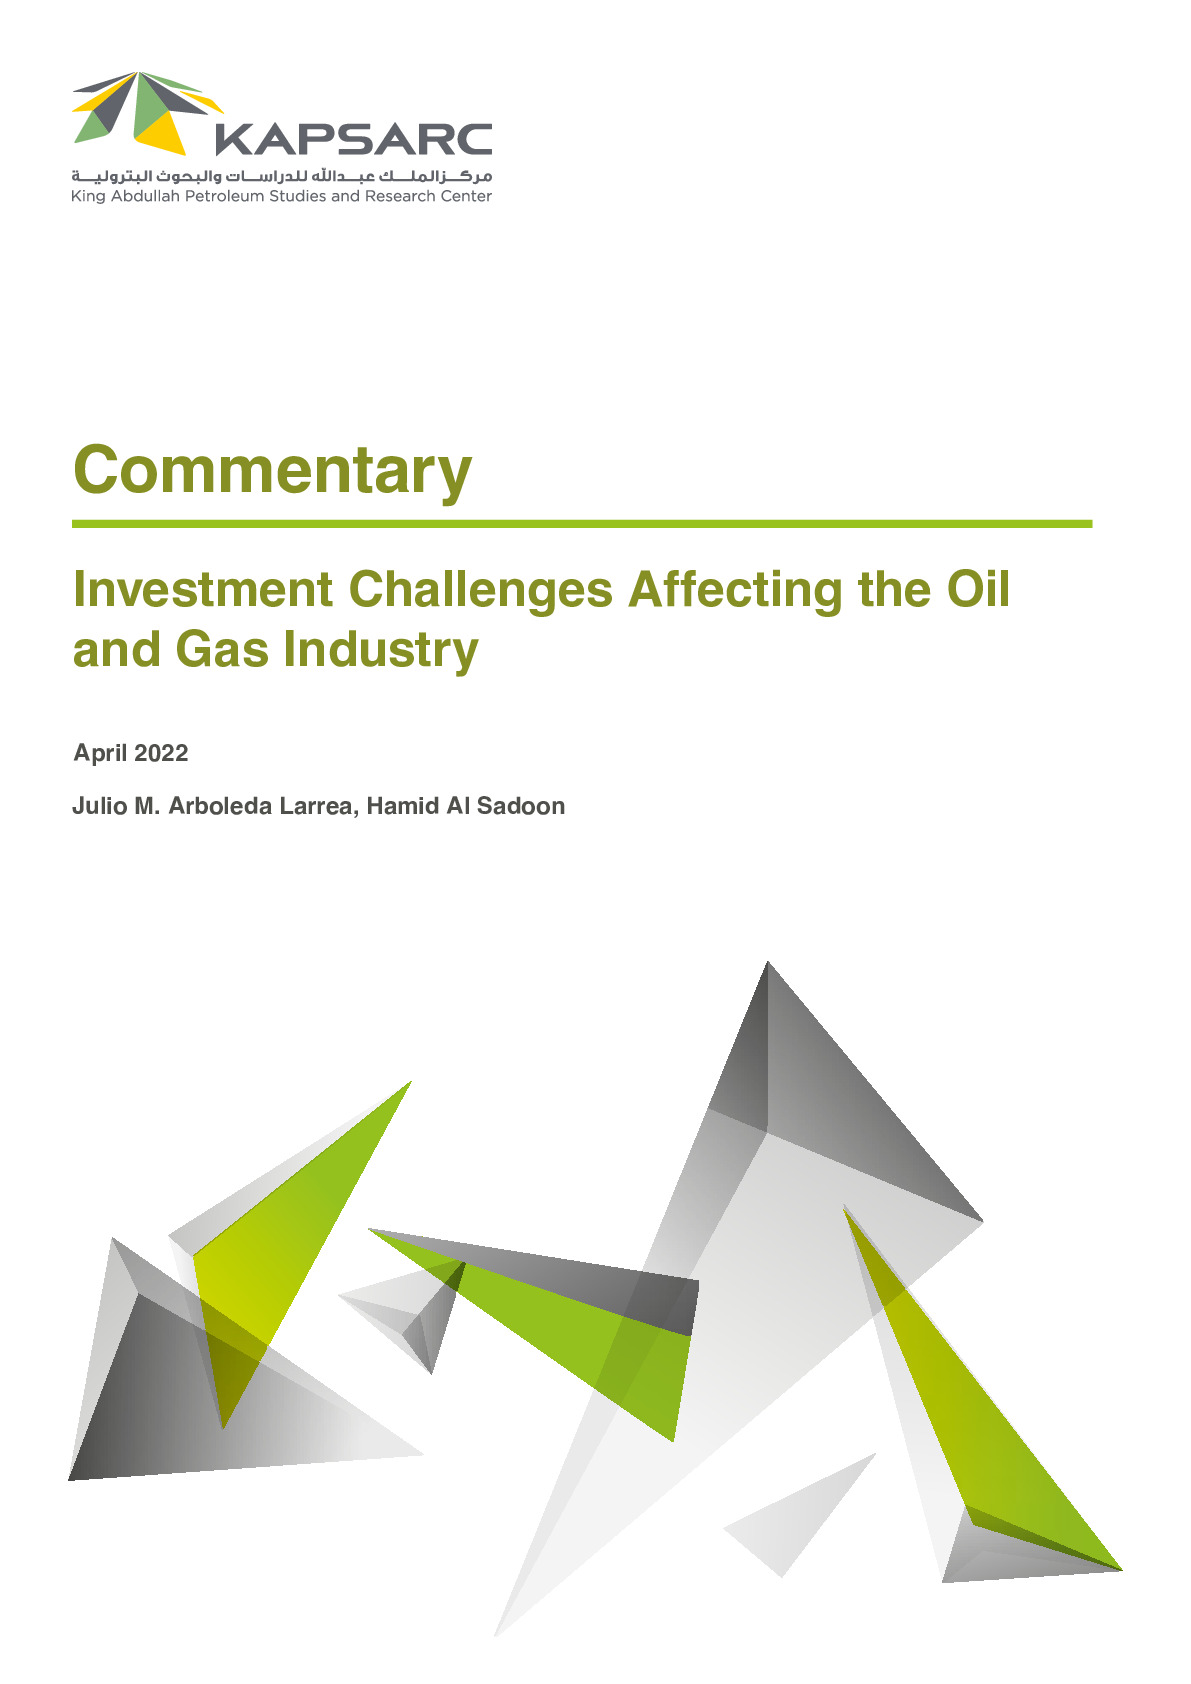 Investment Challenges Affecting the Oil and Gas Industry